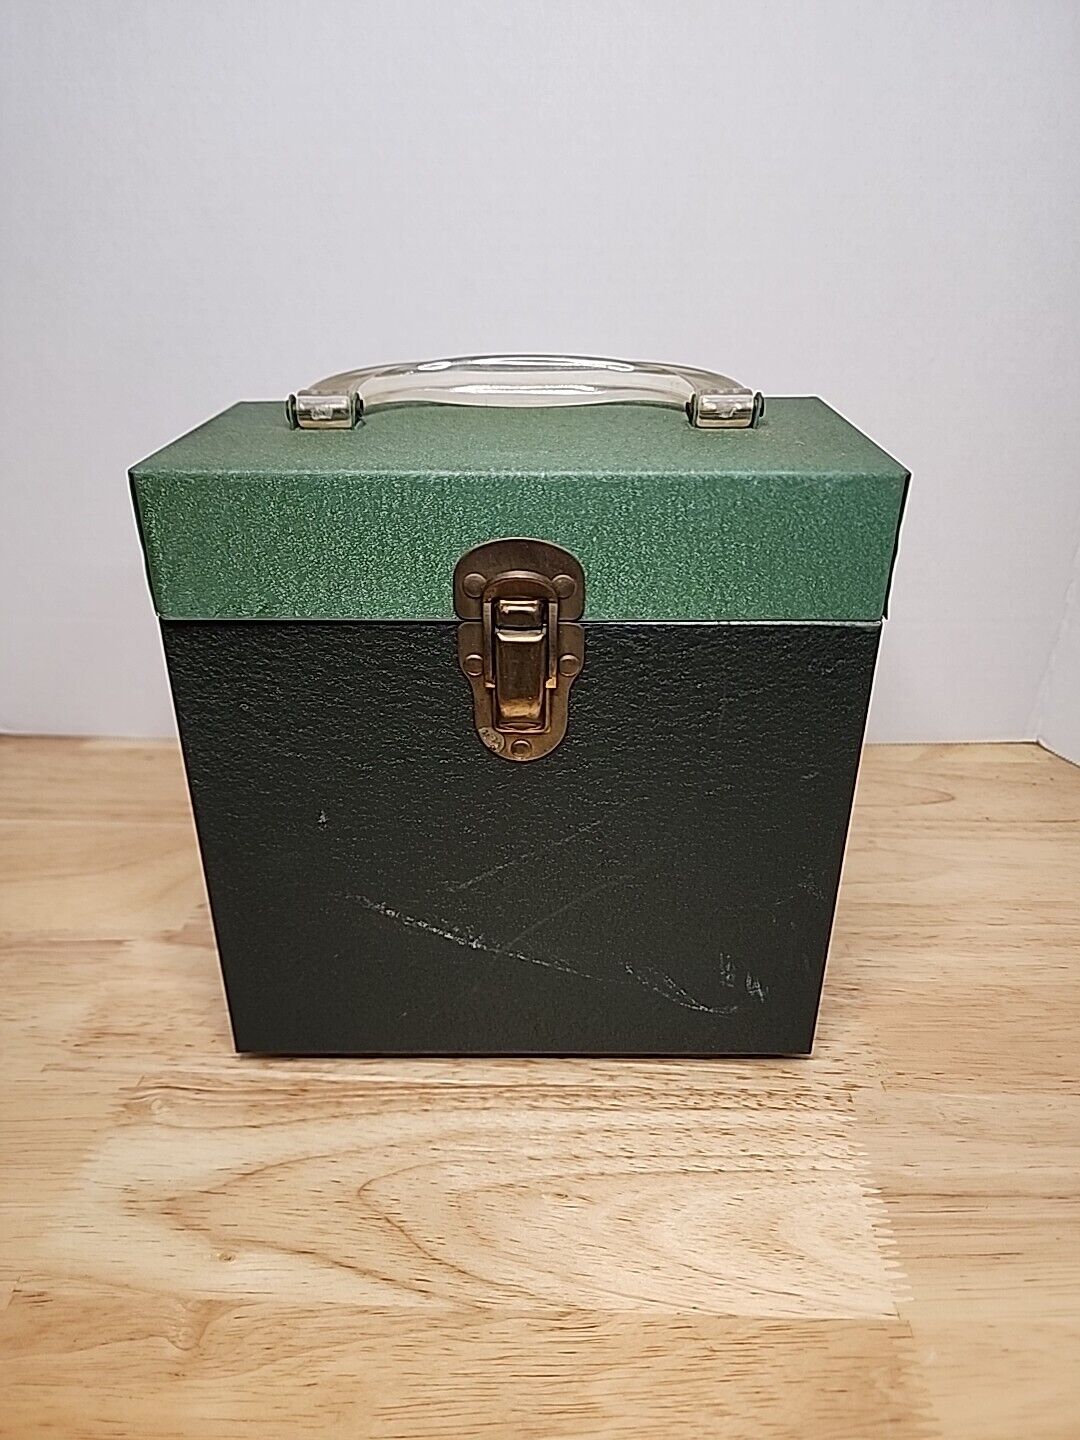 Vintage Metal Record Case Box 2 Tone Green 45 RPM Records Retro With Index Cards